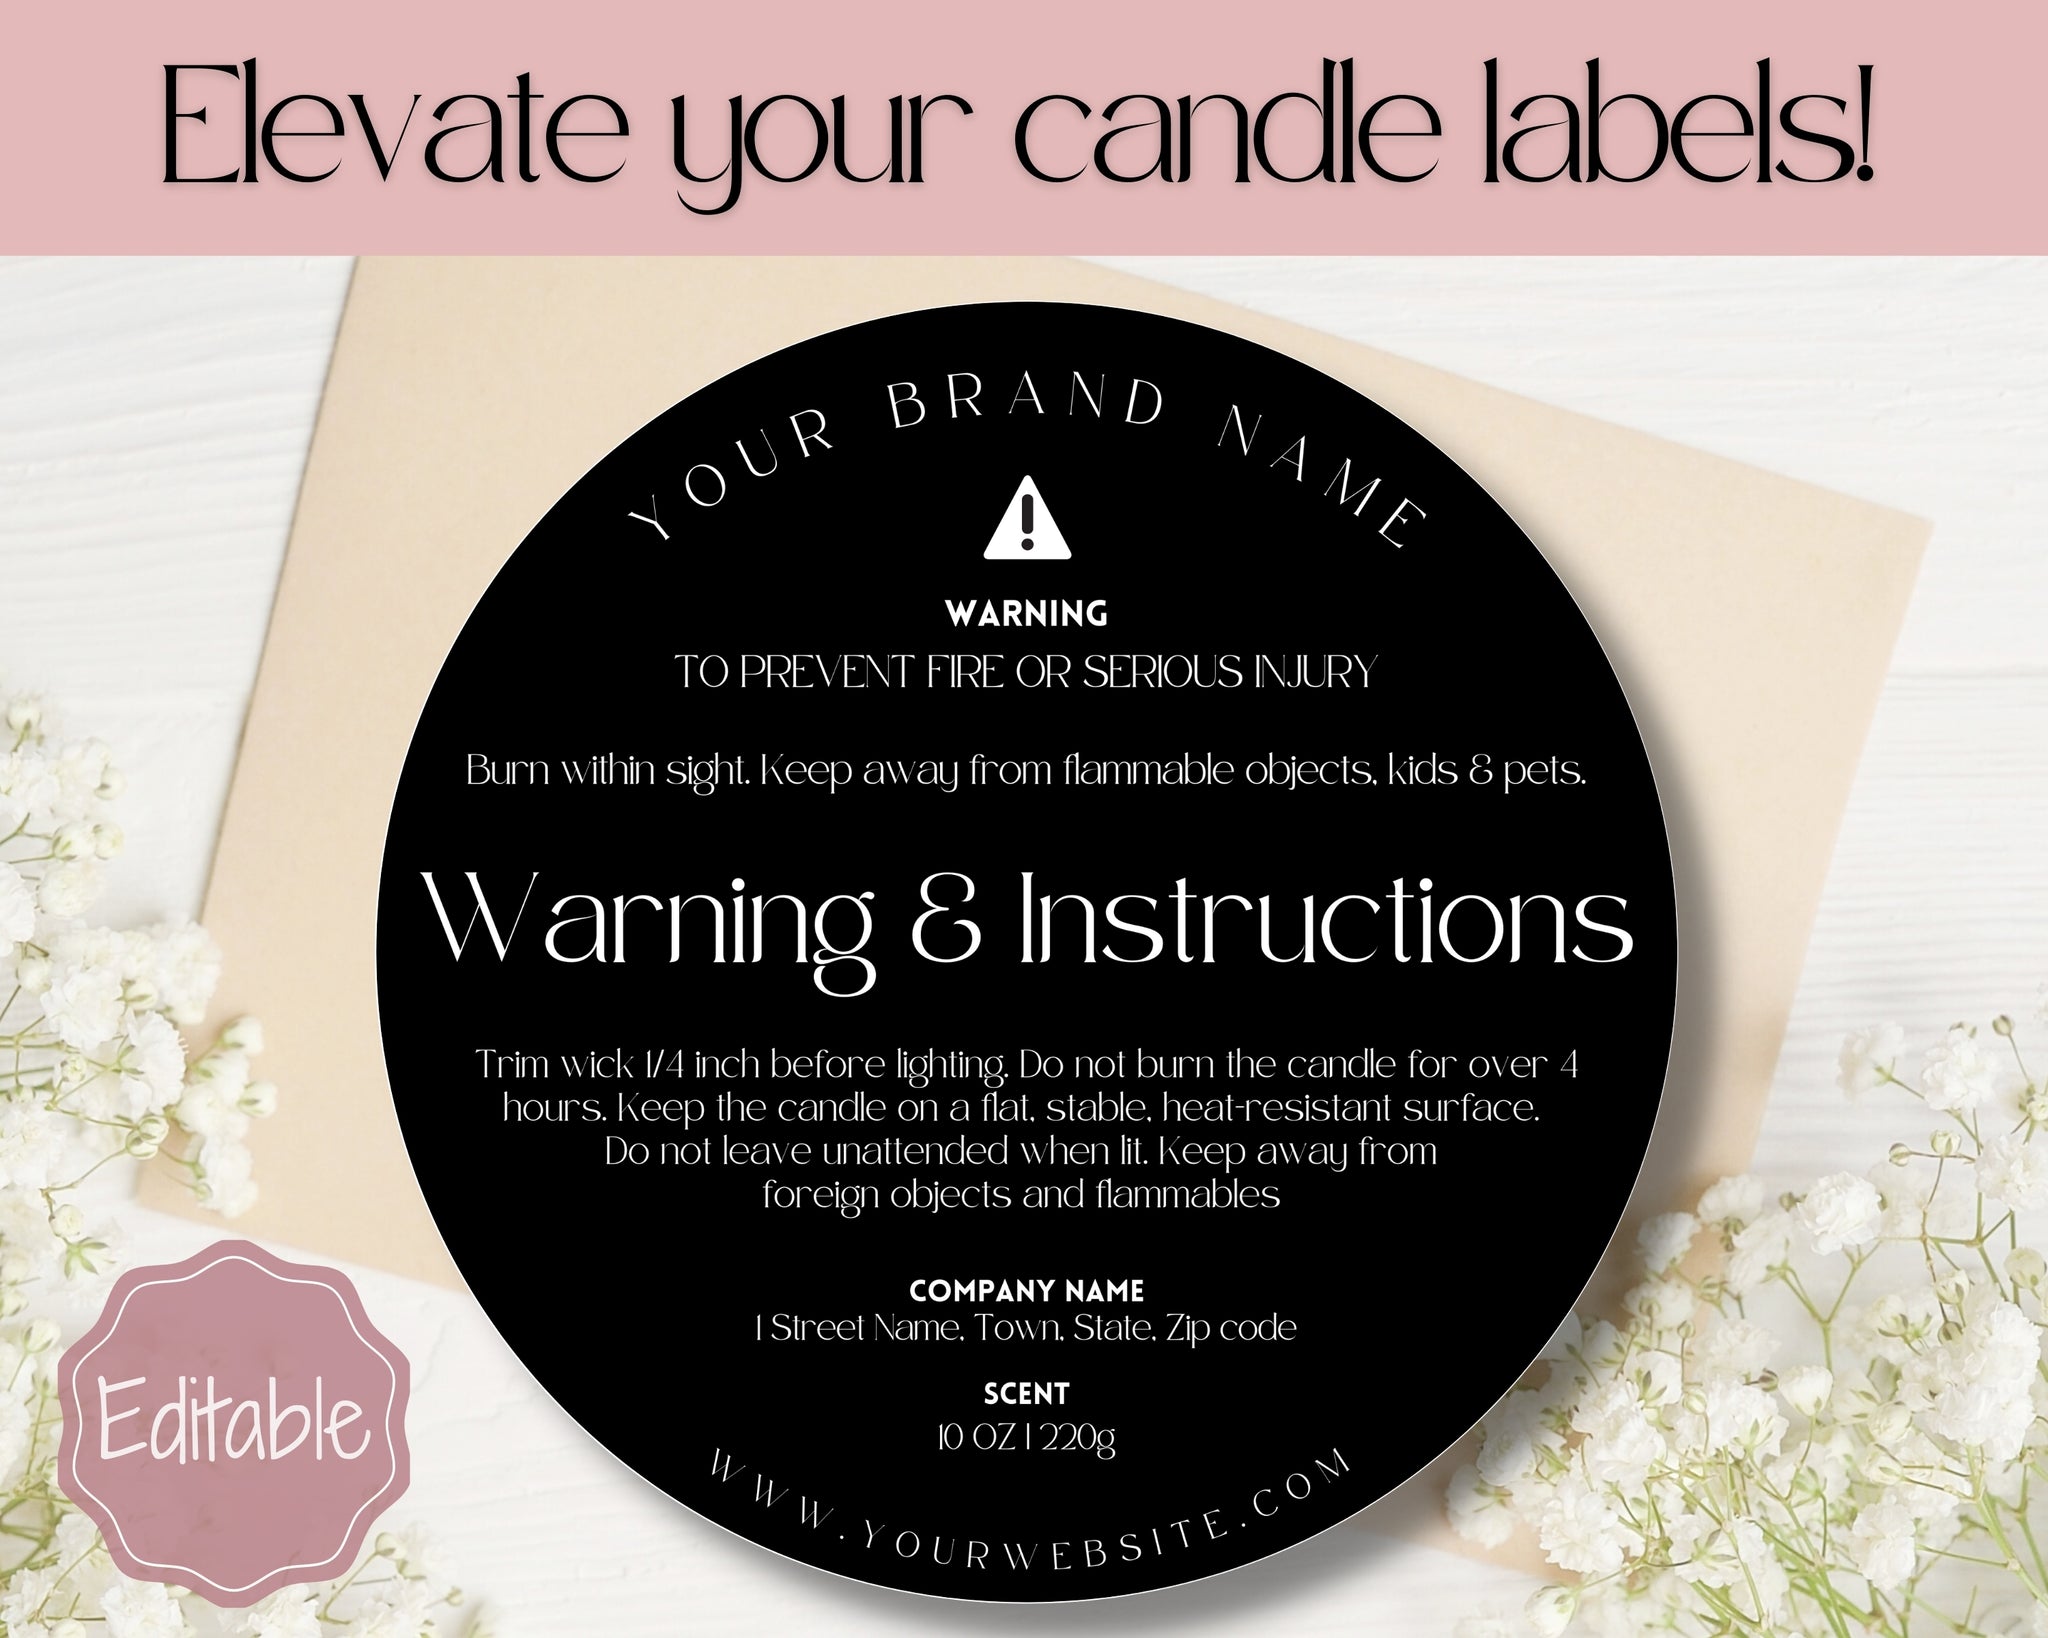 Candle Warning Label Requirements  Candle Warning Labels Template